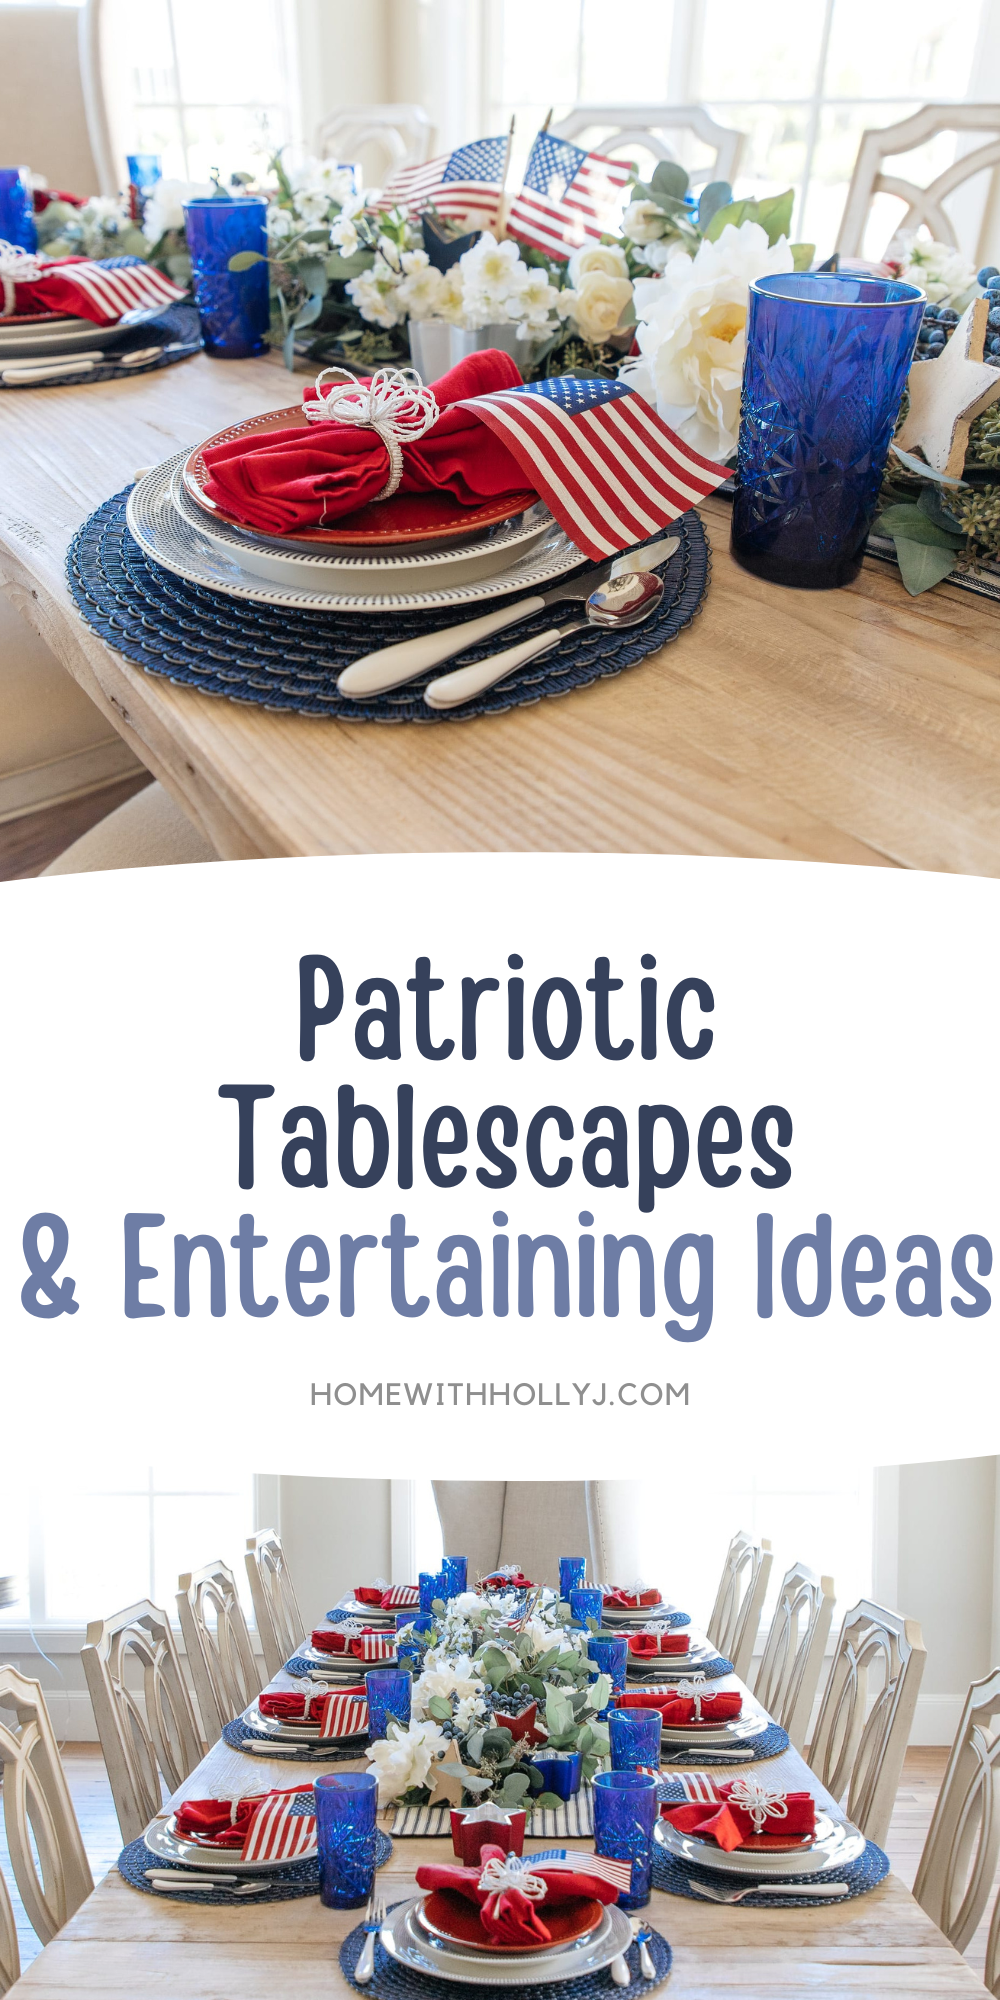 Hosting at Home for the Holidays - Patriotic Tablescapes and entertaining ideas for your upcomping Fourth of July celebrations.